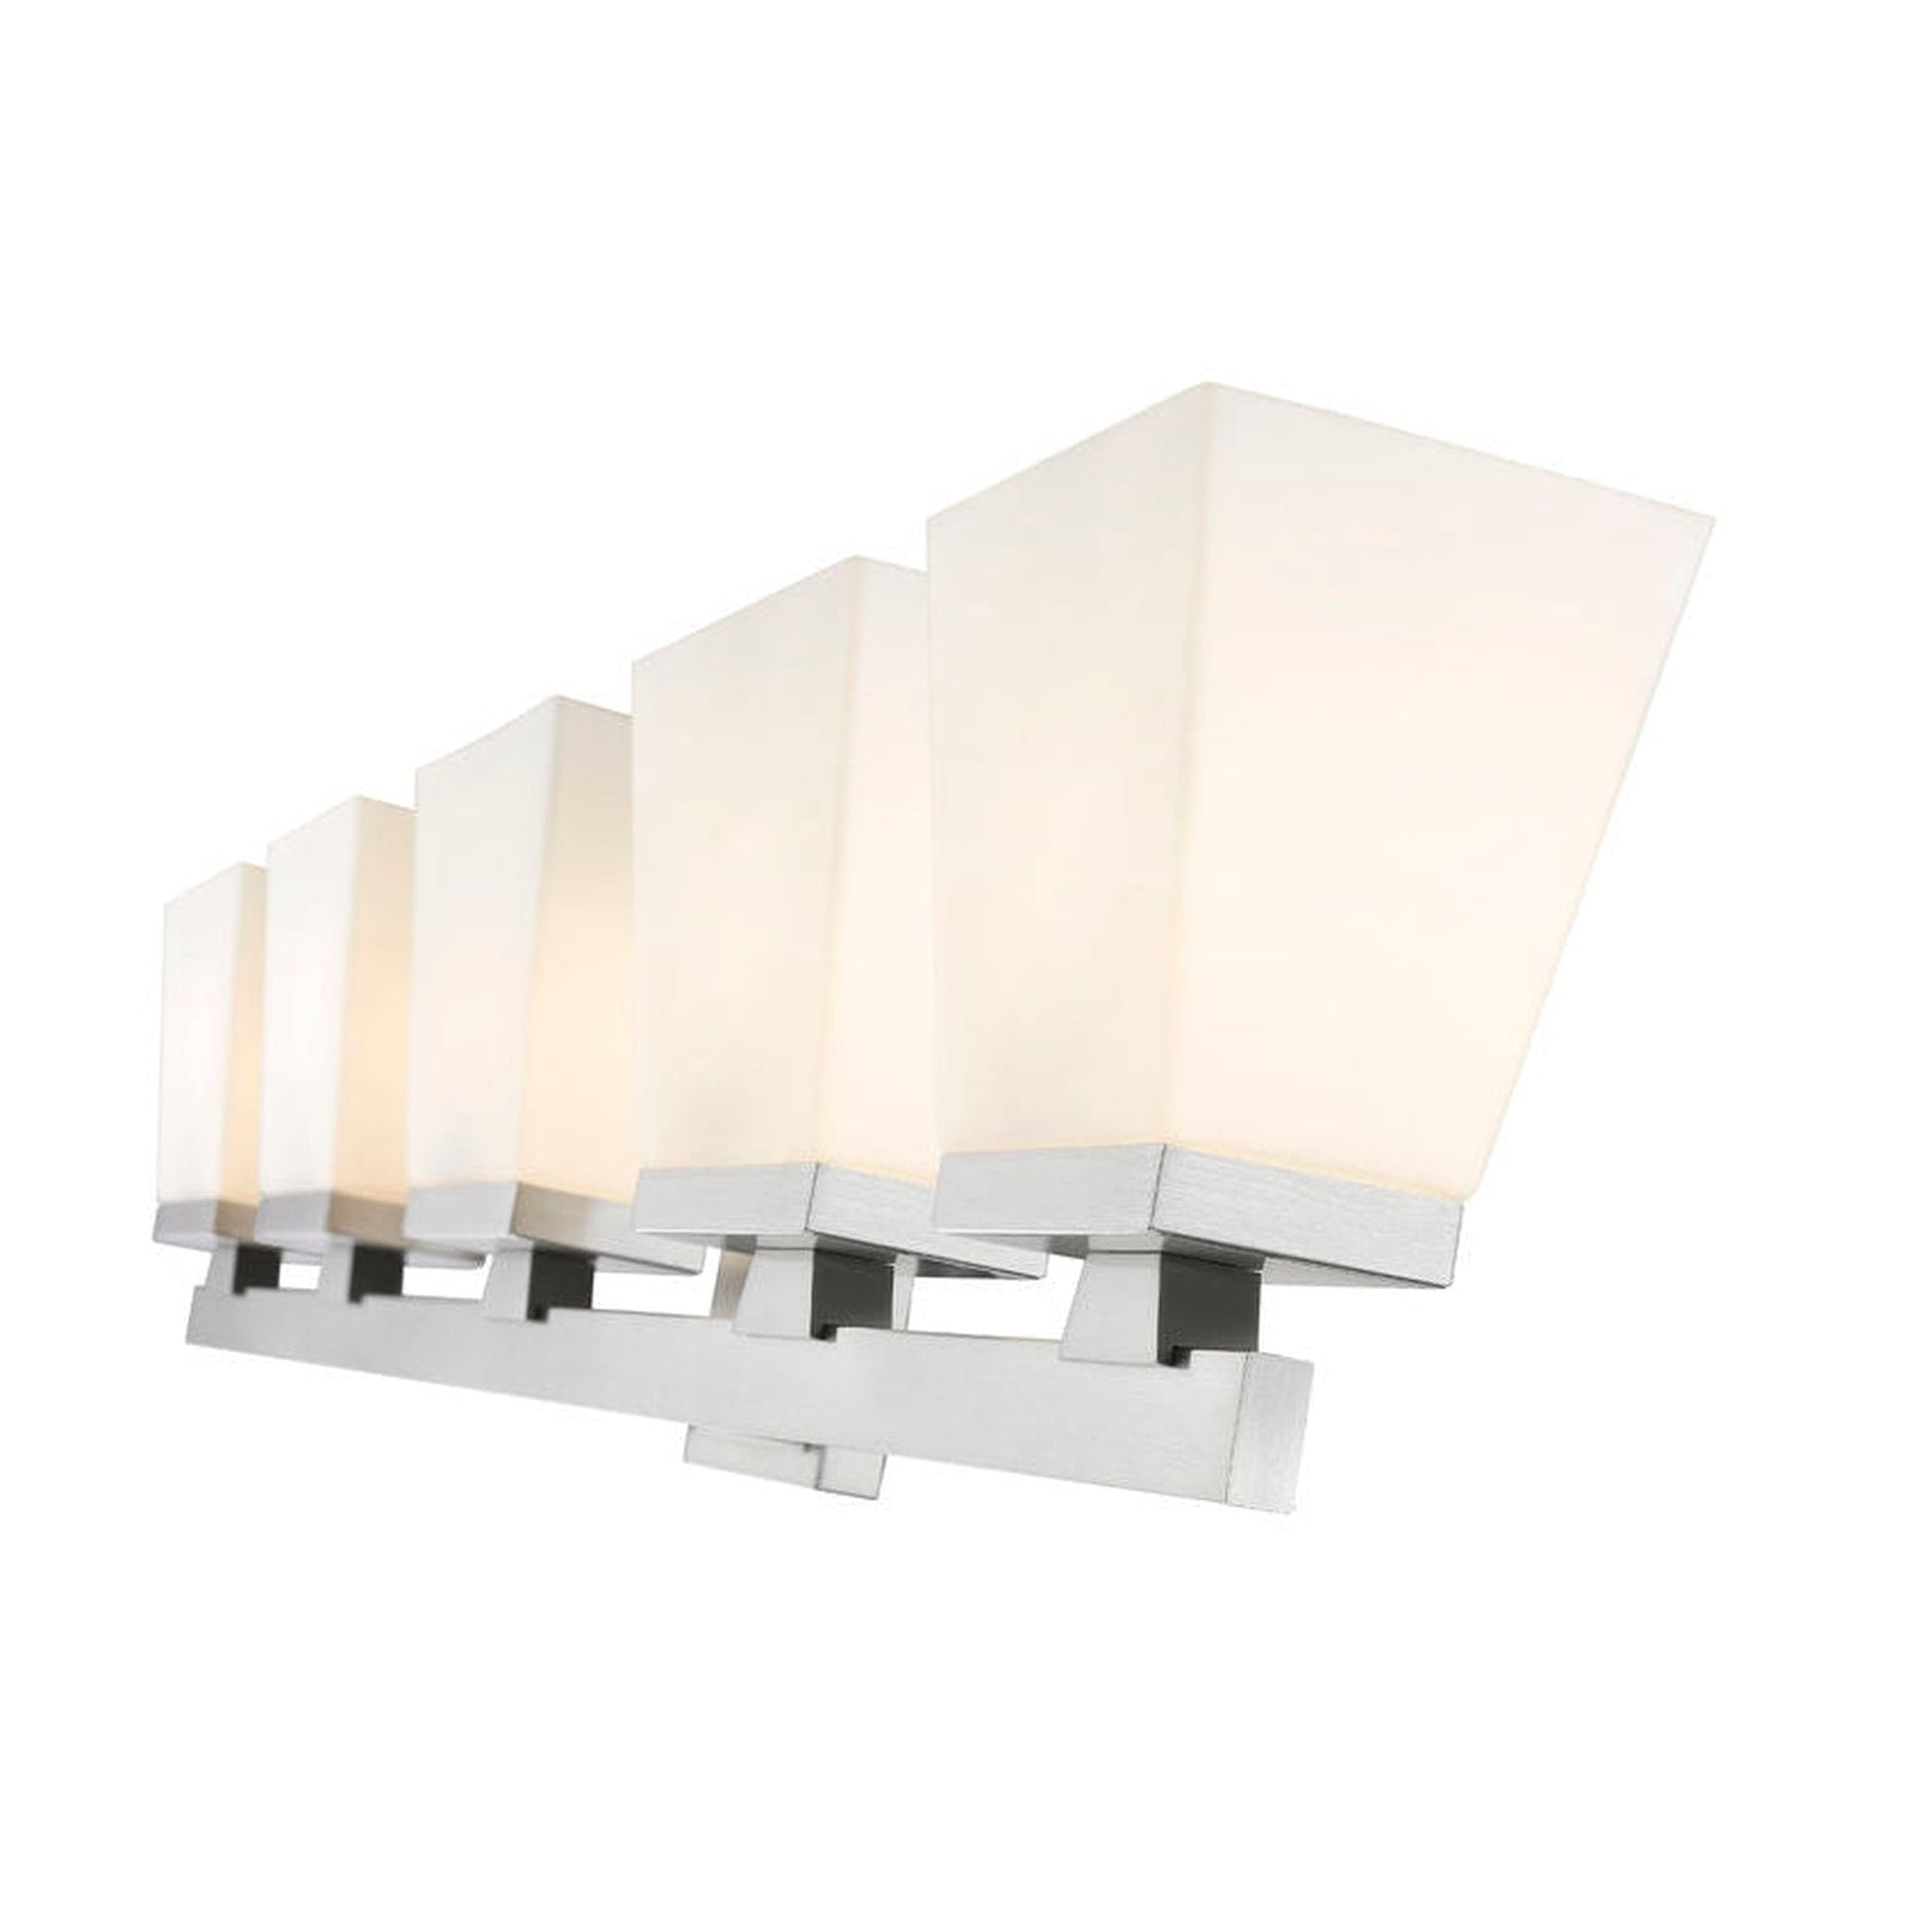 Z-Lite Astor 36" 5-Light Brushed Nickel Vanity Light With Etched Opal Glass Shade